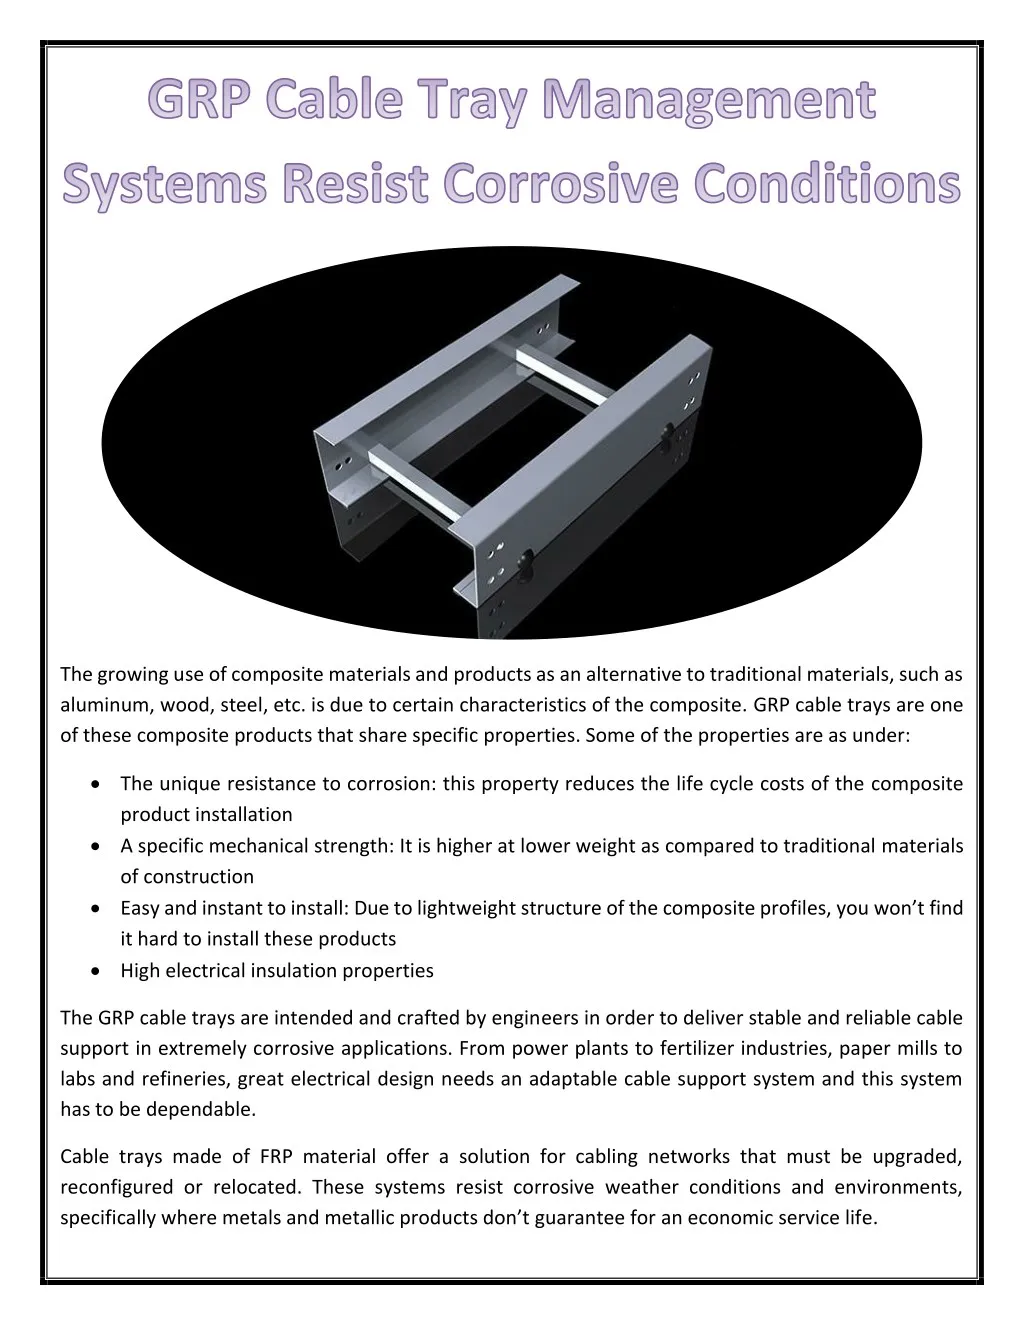 the growing use of composite materials